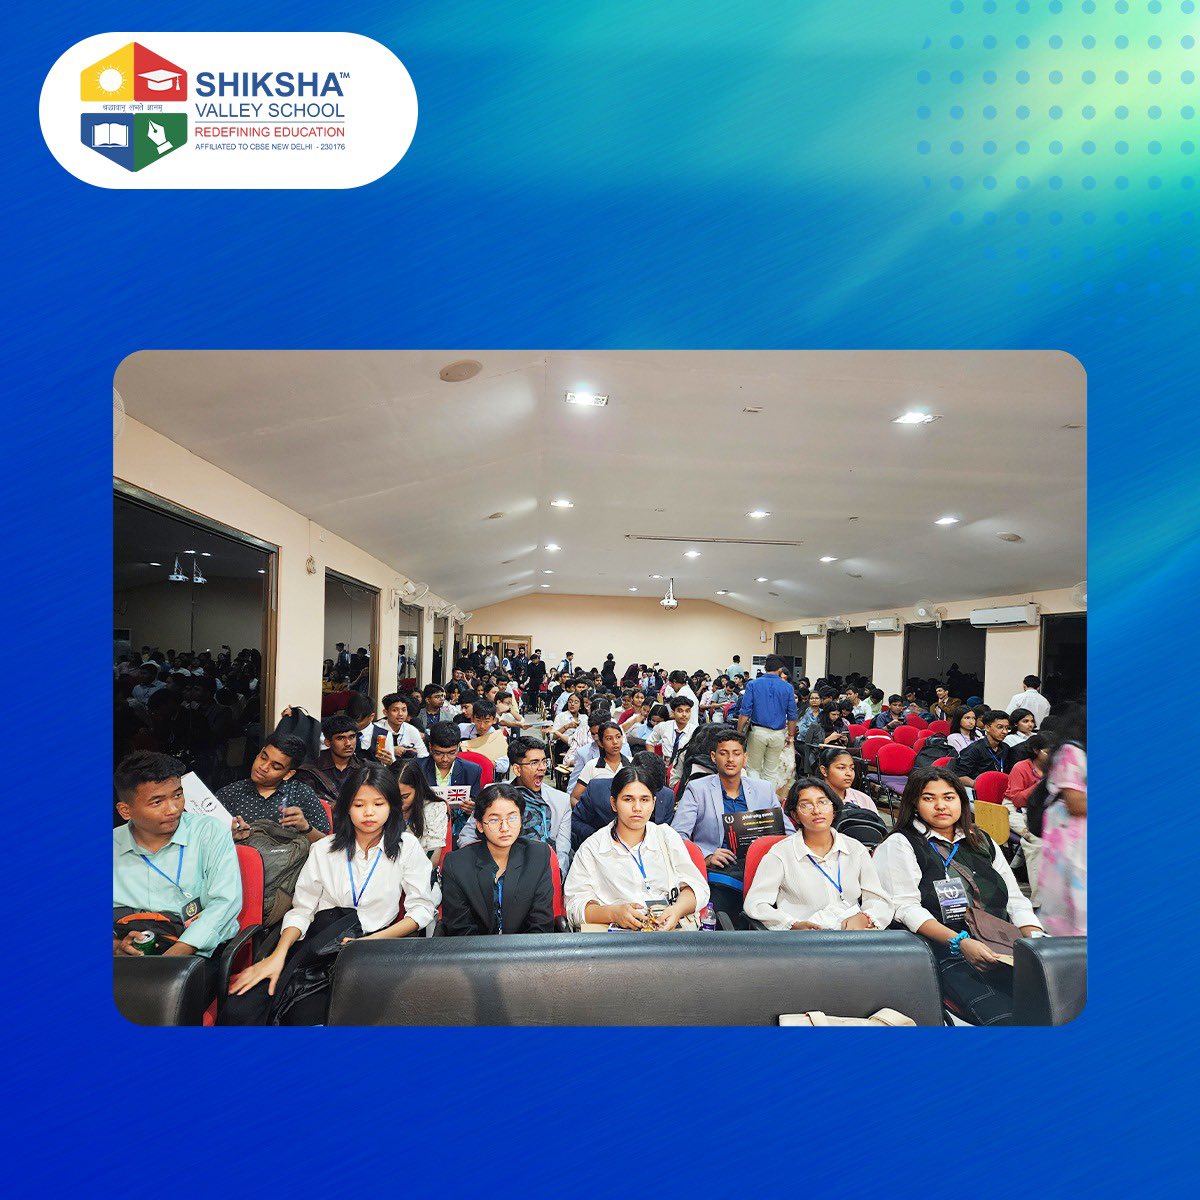 Students from SVS participated in the Global Unity Summit Model United Nations (GUSMUN) at Assam Downtown University, Guwahati.
#ShikshaValleySchool #SVS #BoardingSchool #Students #Education #MUN #ModelUnitedNations